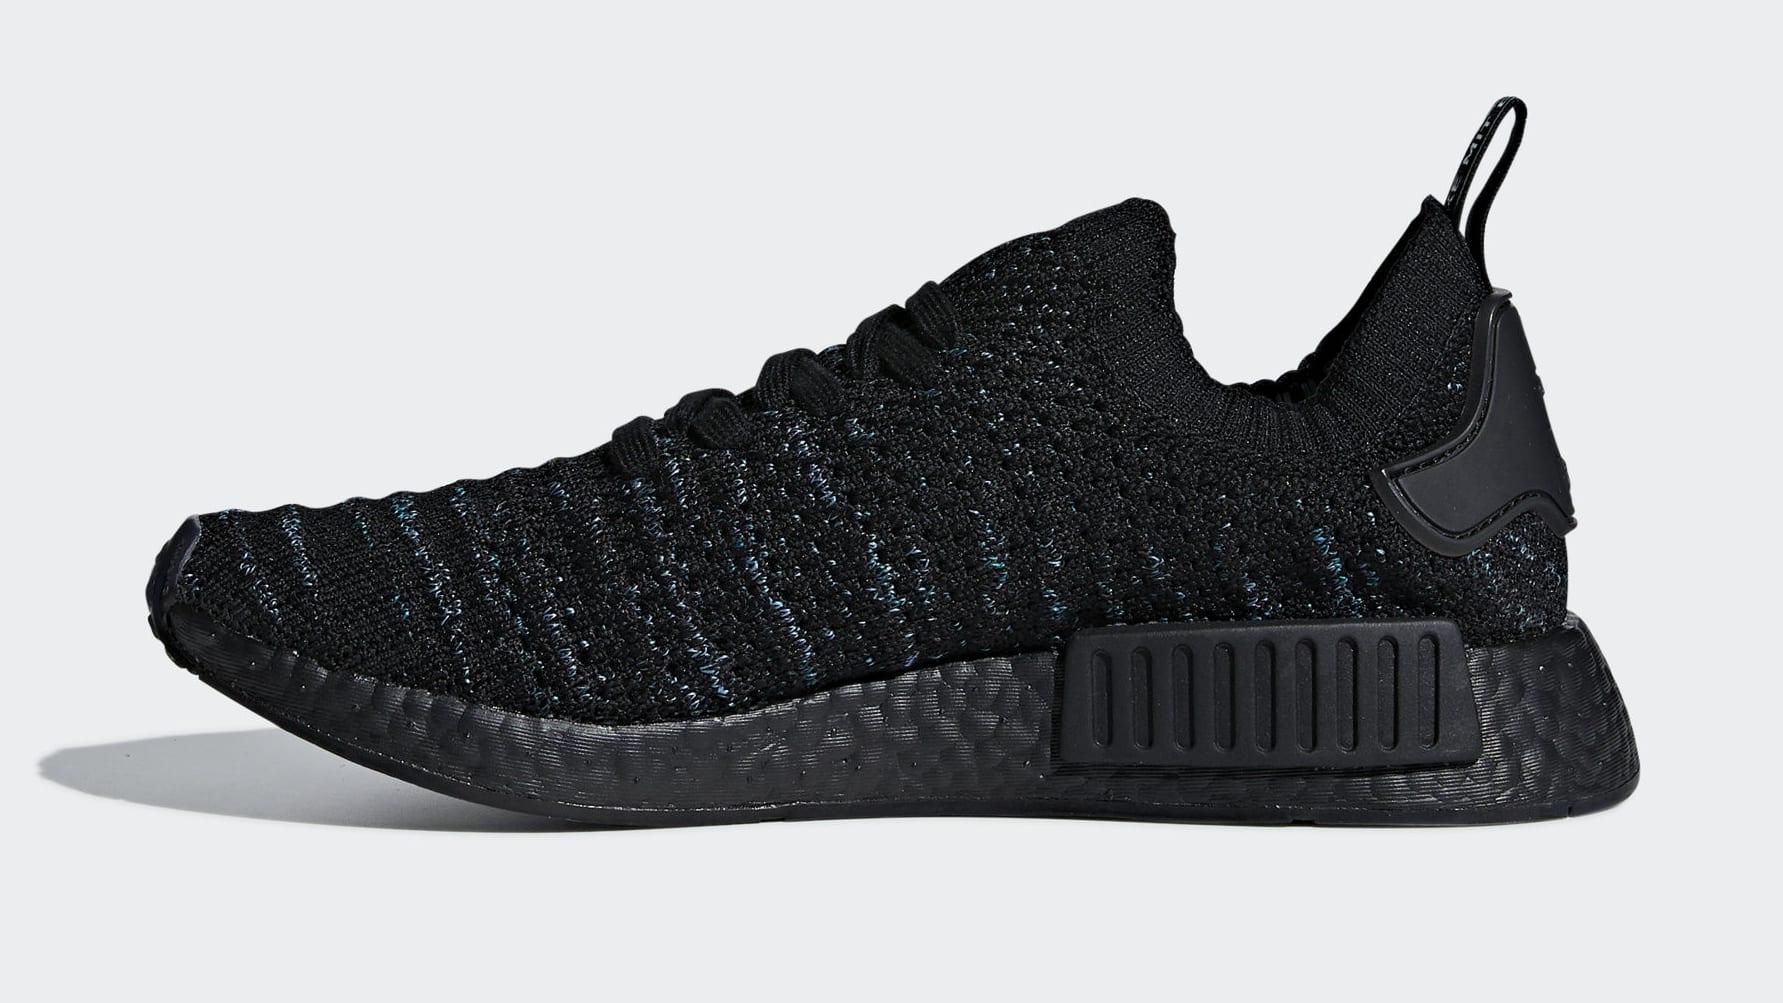 Parley x Adidas NMD_R1 Release Date 7, 2018 AQ0943 | Sole Collector